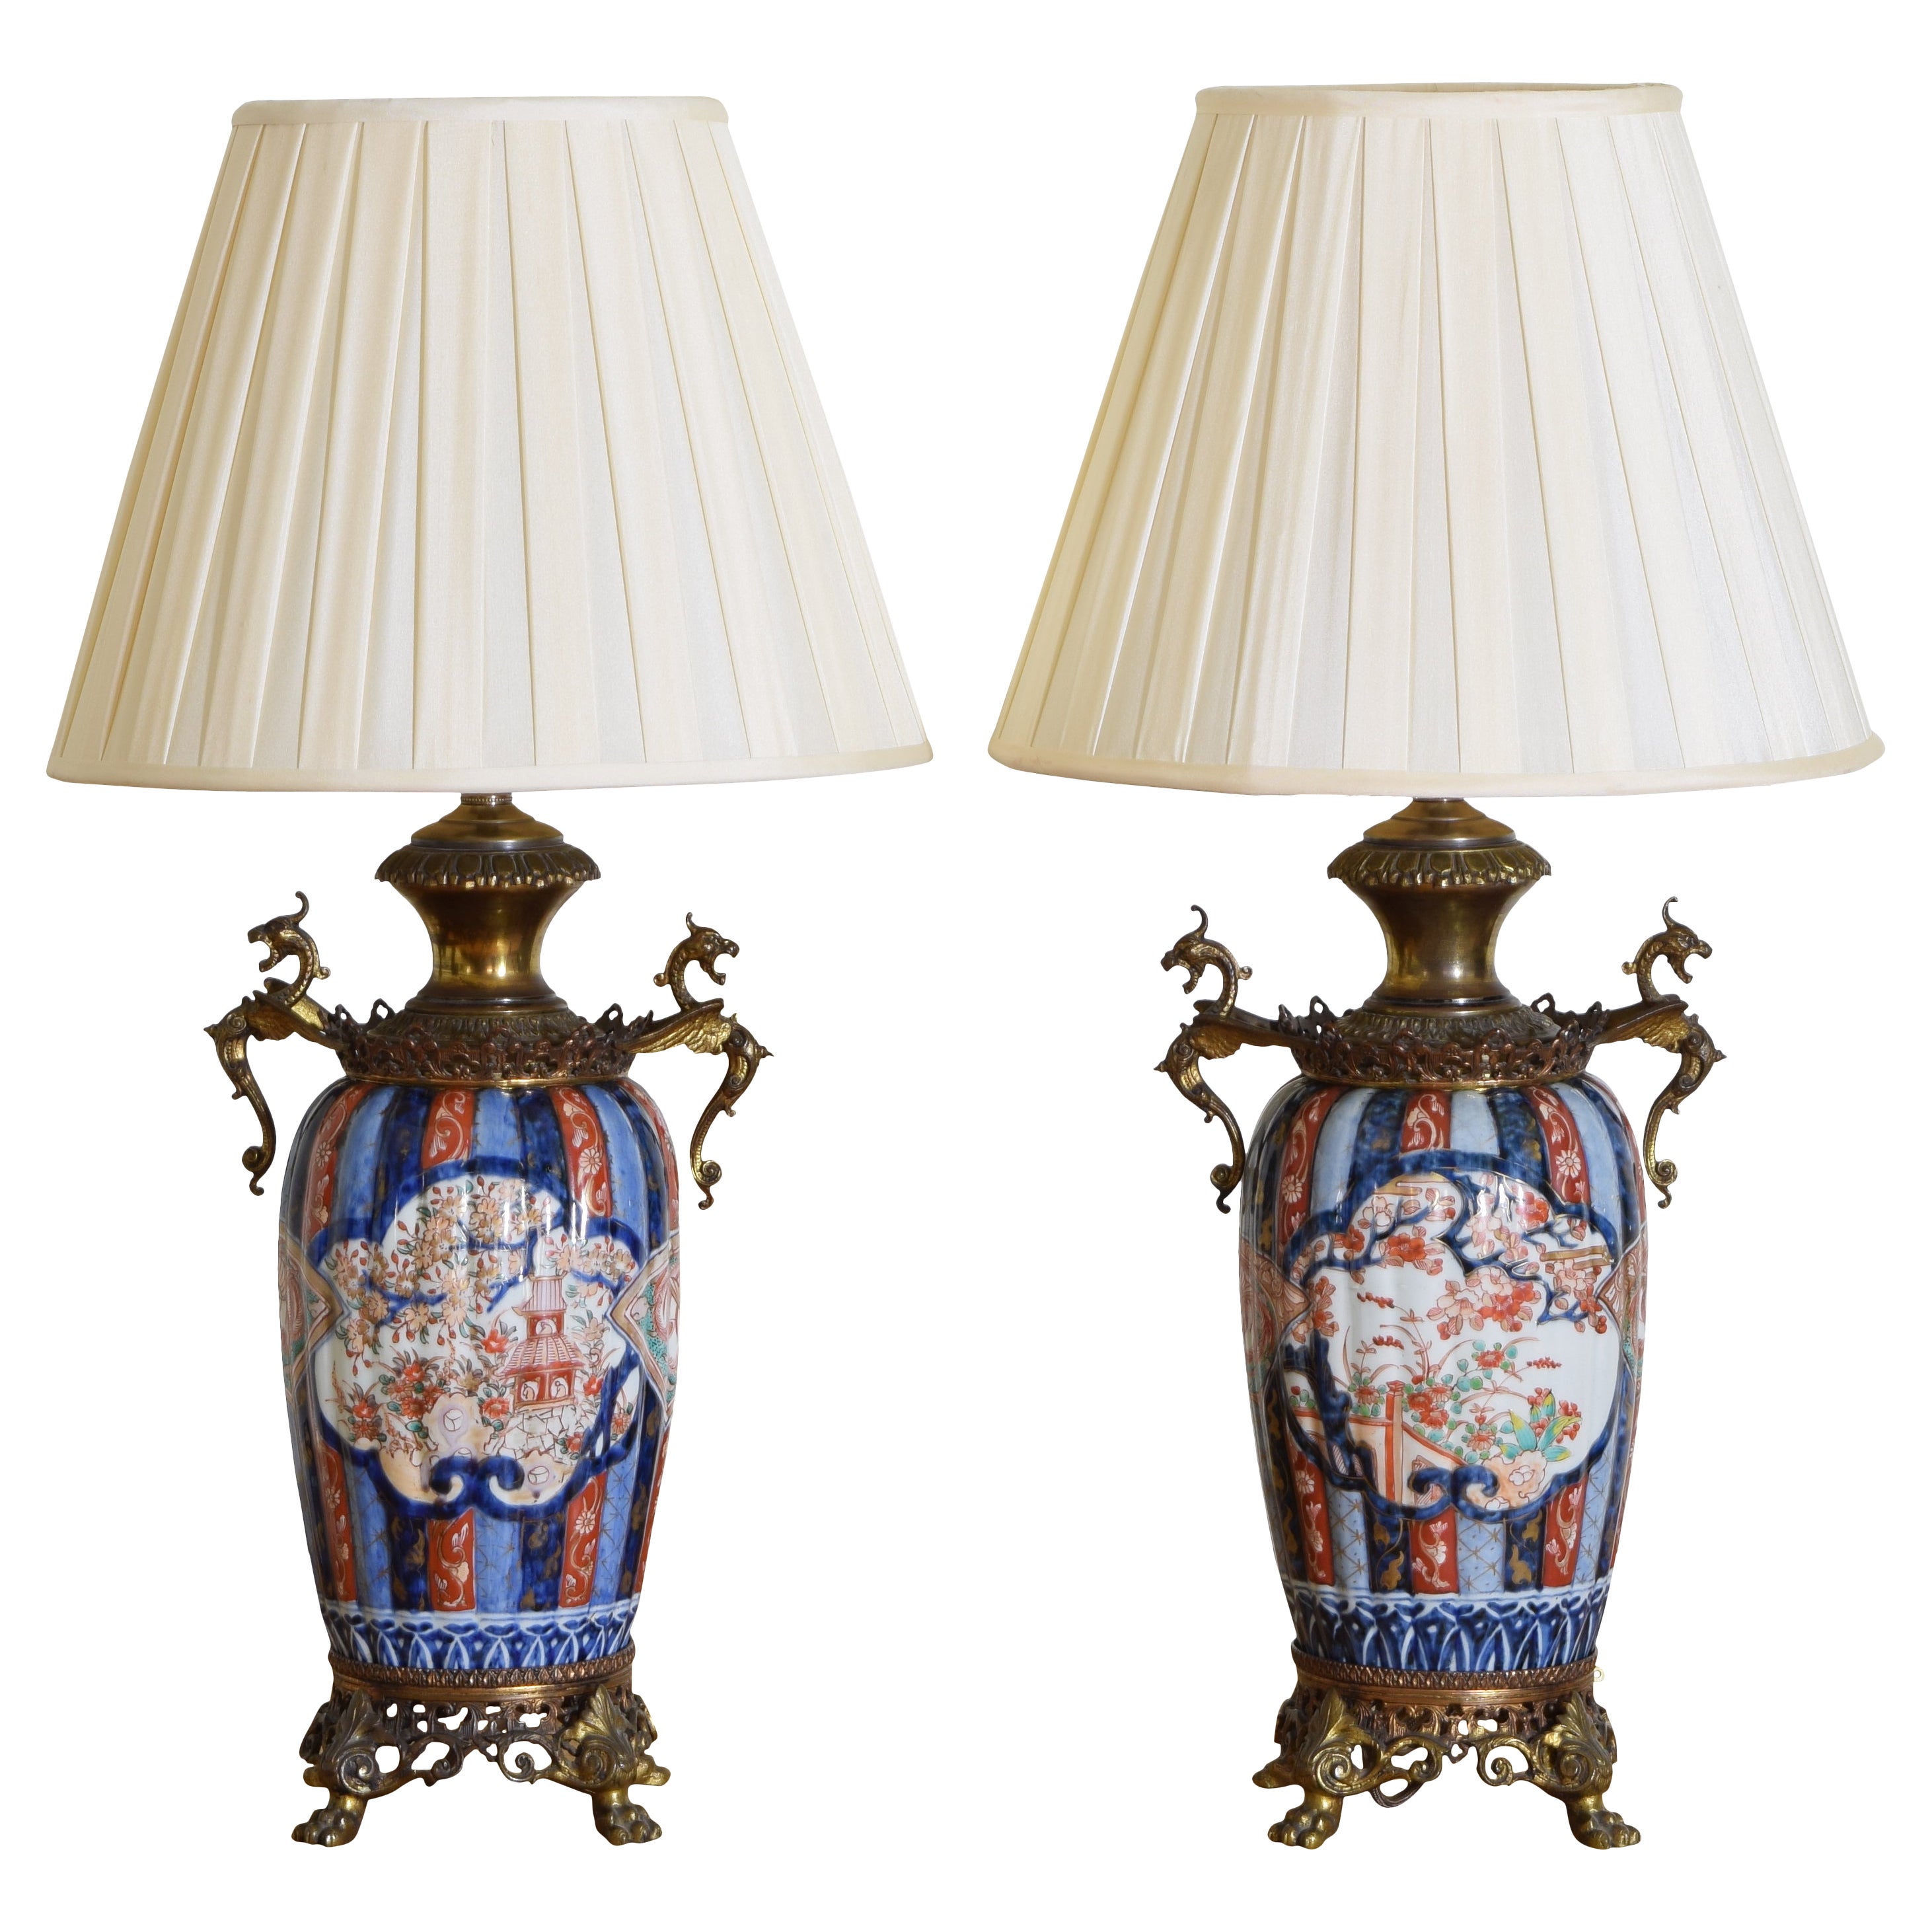 High Victorian Table Lamps